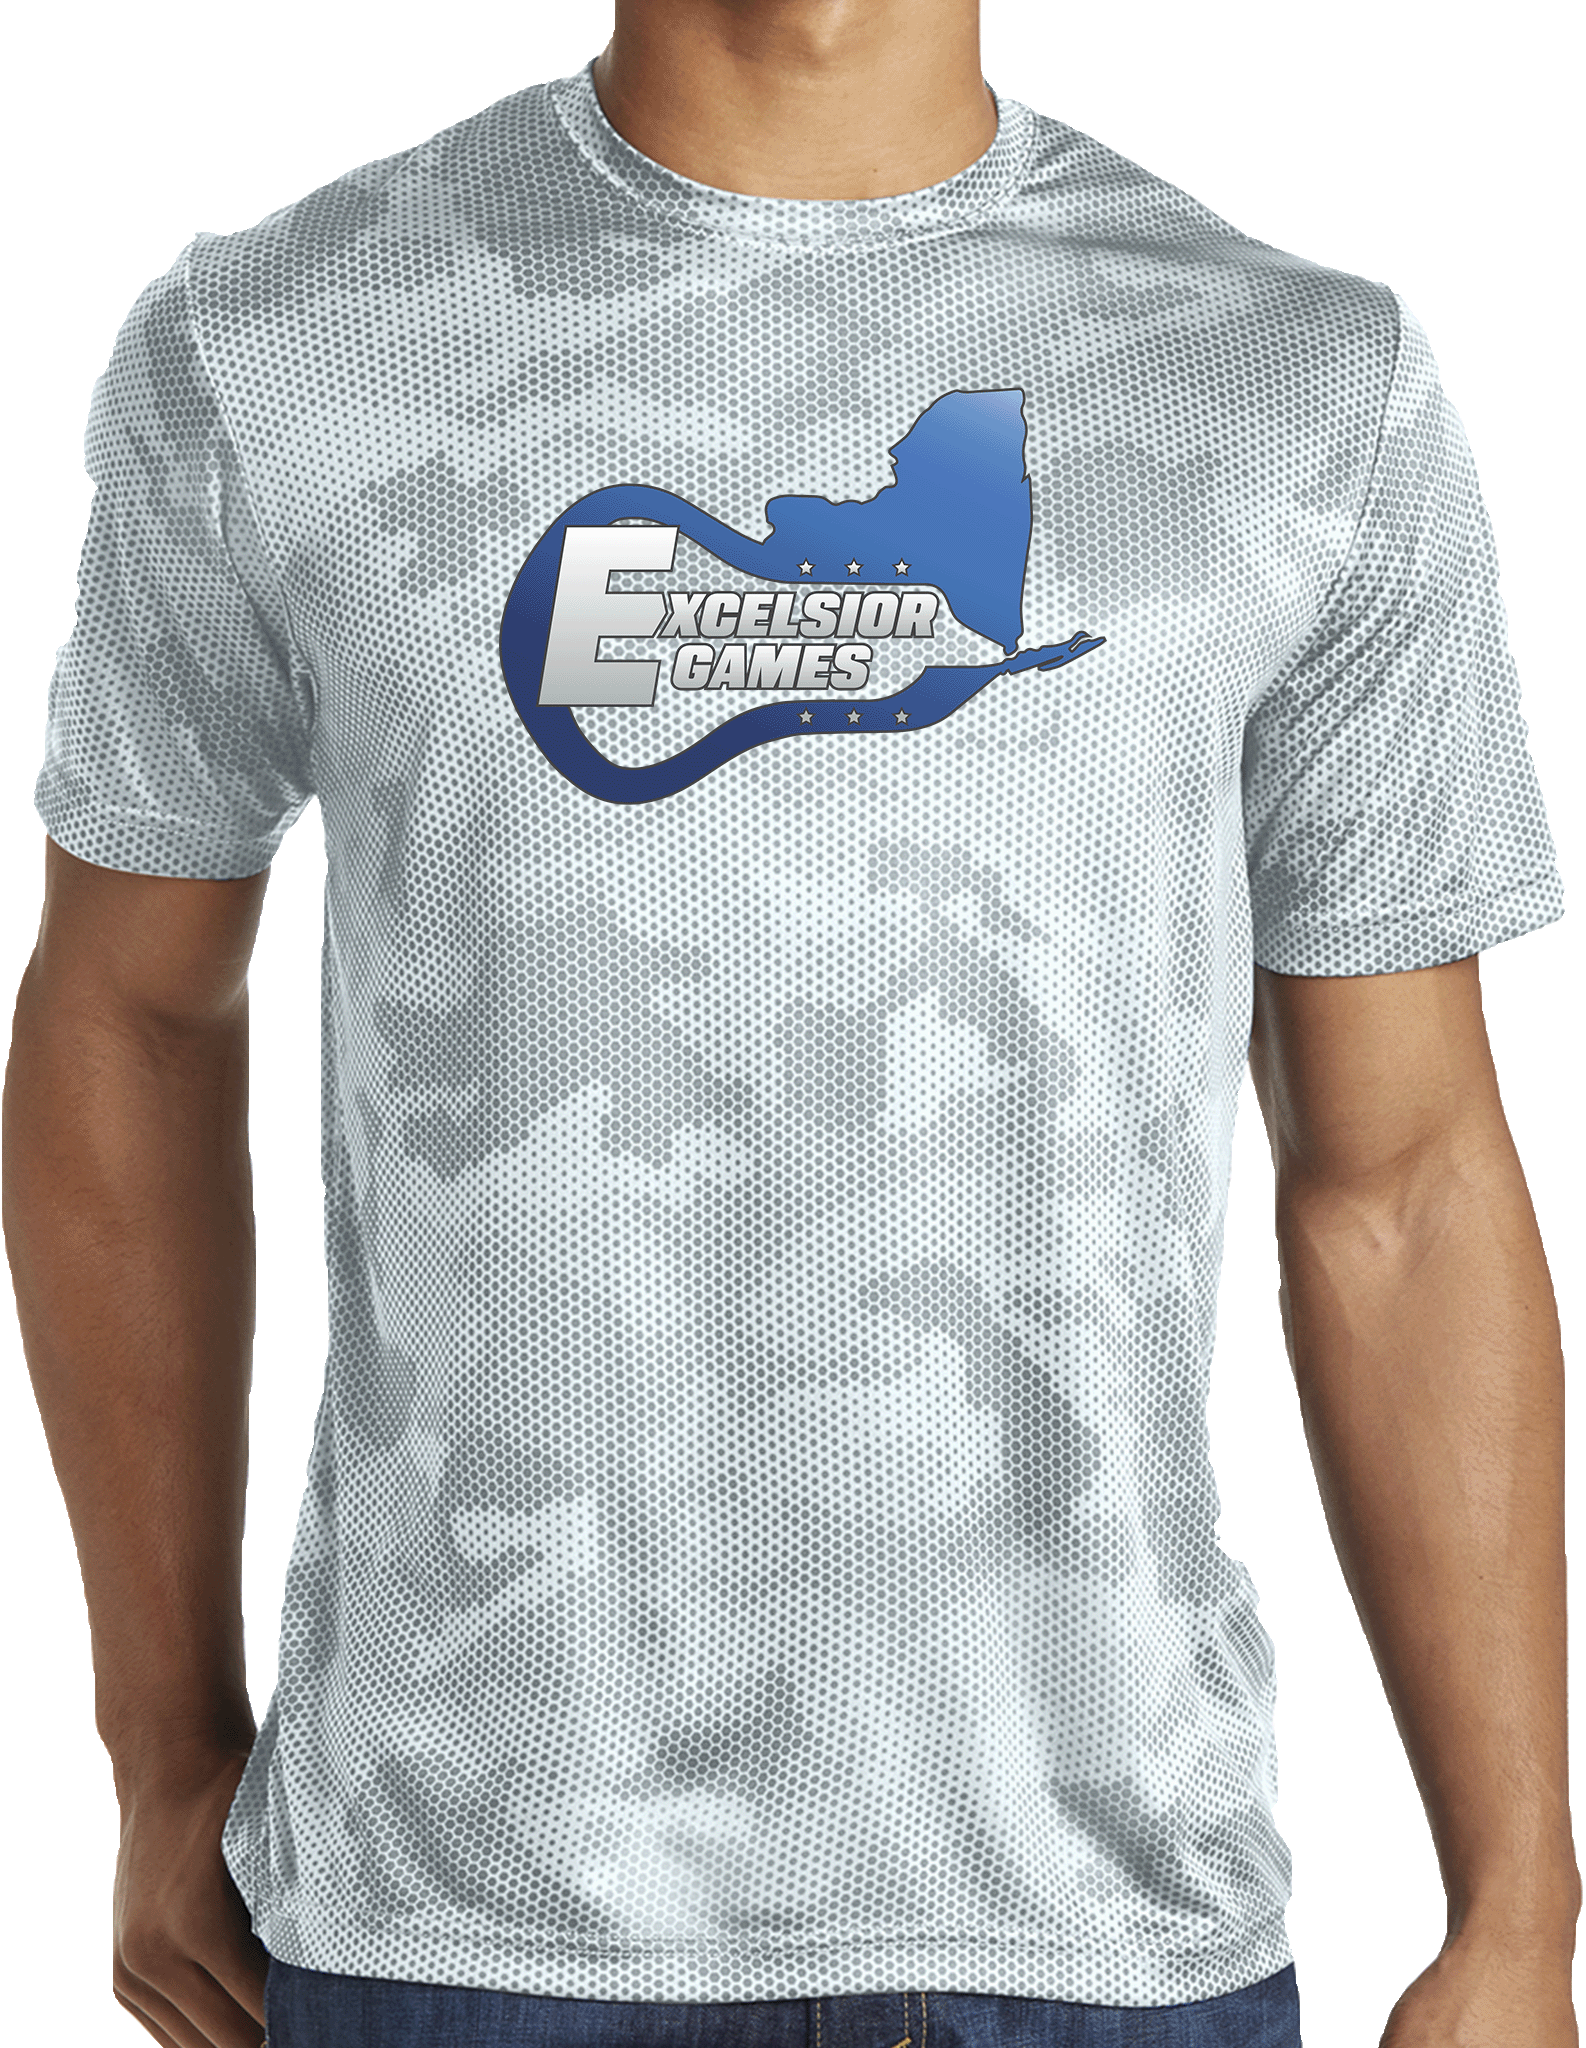 Performance Shirts - 2024 Excelsior Lacrosse Games